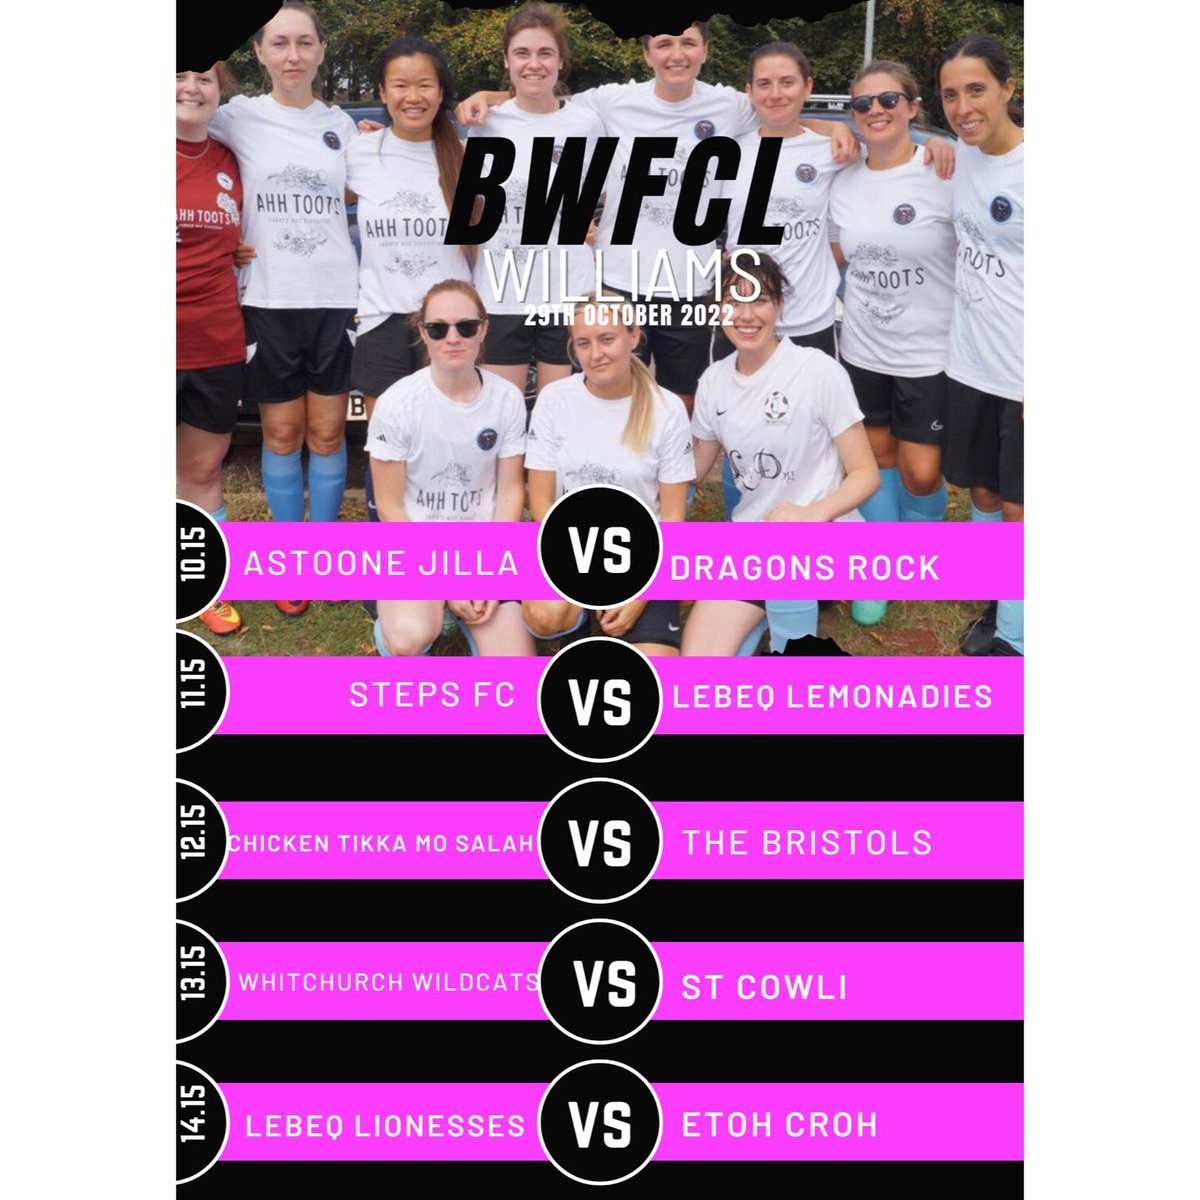 The Bristol Womens Casual League kicks off tomorrow! Looking forward to welcoming everyone to round 13, 31 teams, 3 divisions, let’s go! Anyone welcome to come and watch tomorrow at Bristol Brunel Academy, BS15 1NU #bwfcl #grassrootsfootball #hergametoo #inclusivefootballforall